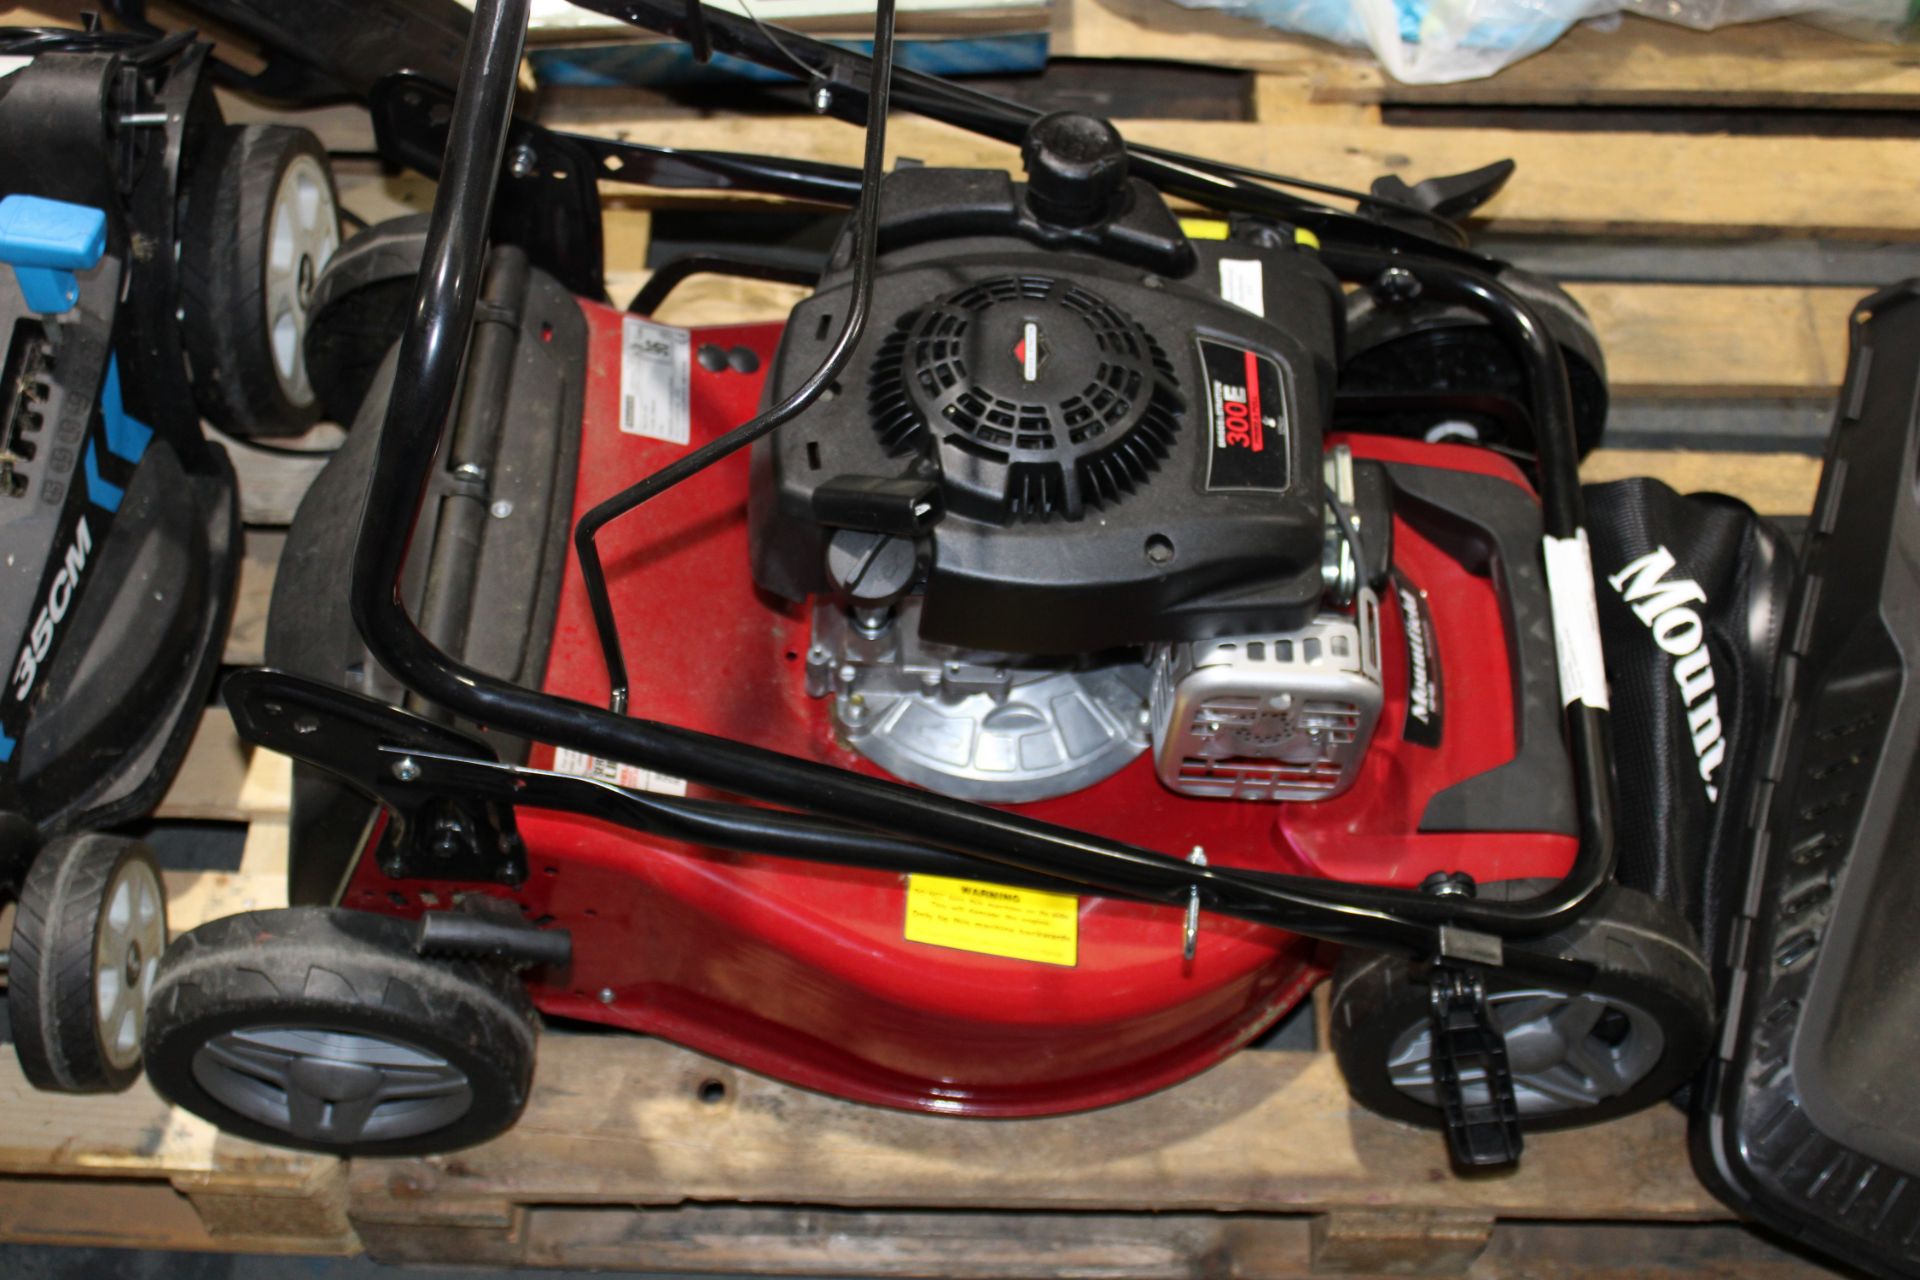 MOUNTFIELD HP185 PETROL LAWNMOWER Â£278.04Condition ReportAppraisal Available on Request- All